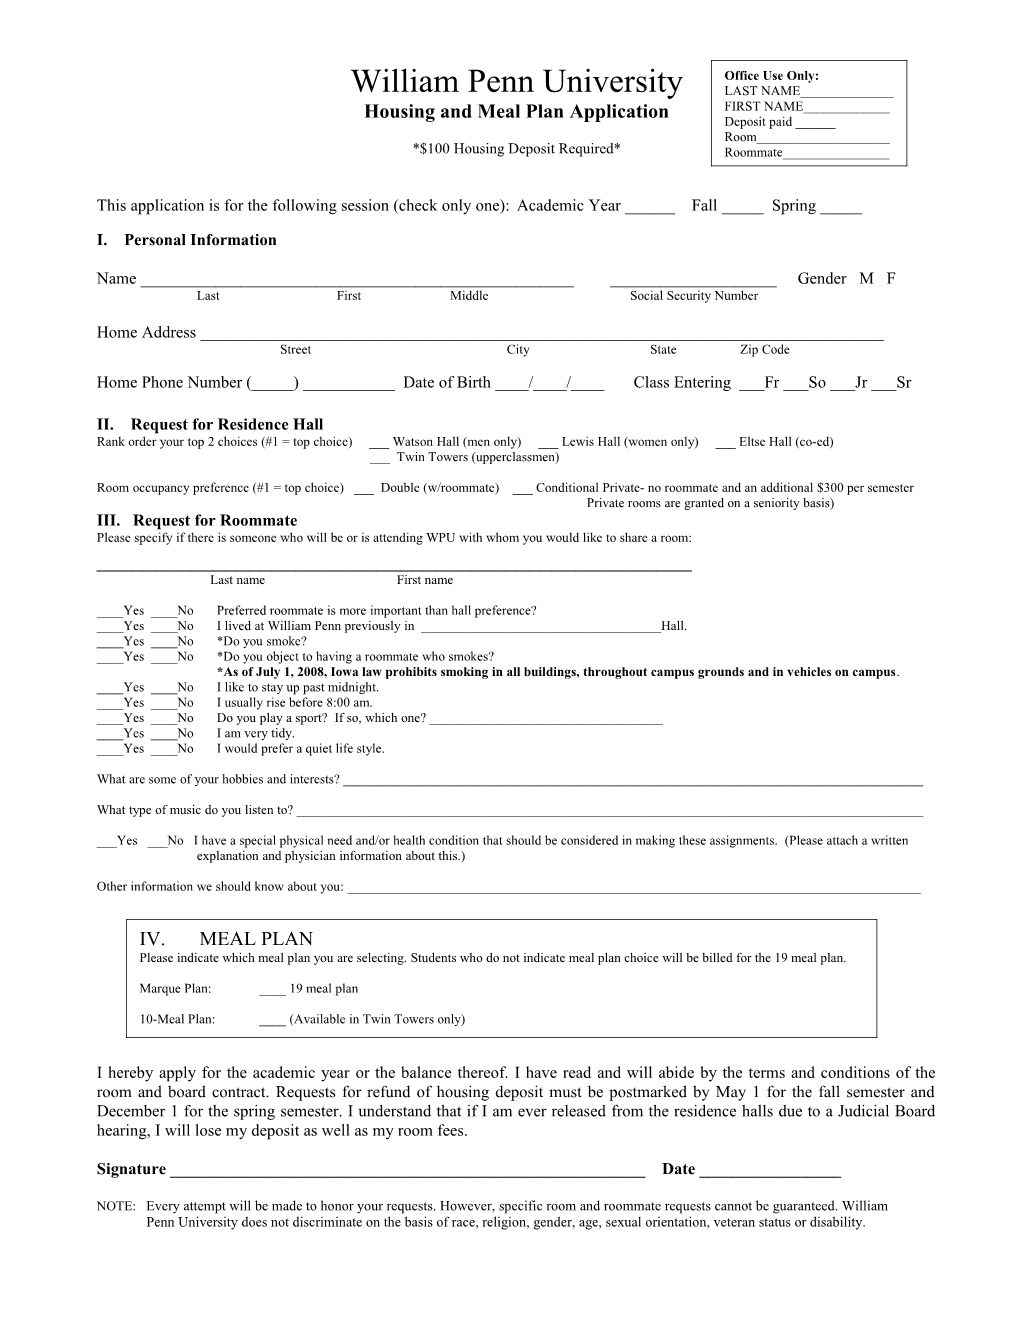 Housing and Meal Plan Application